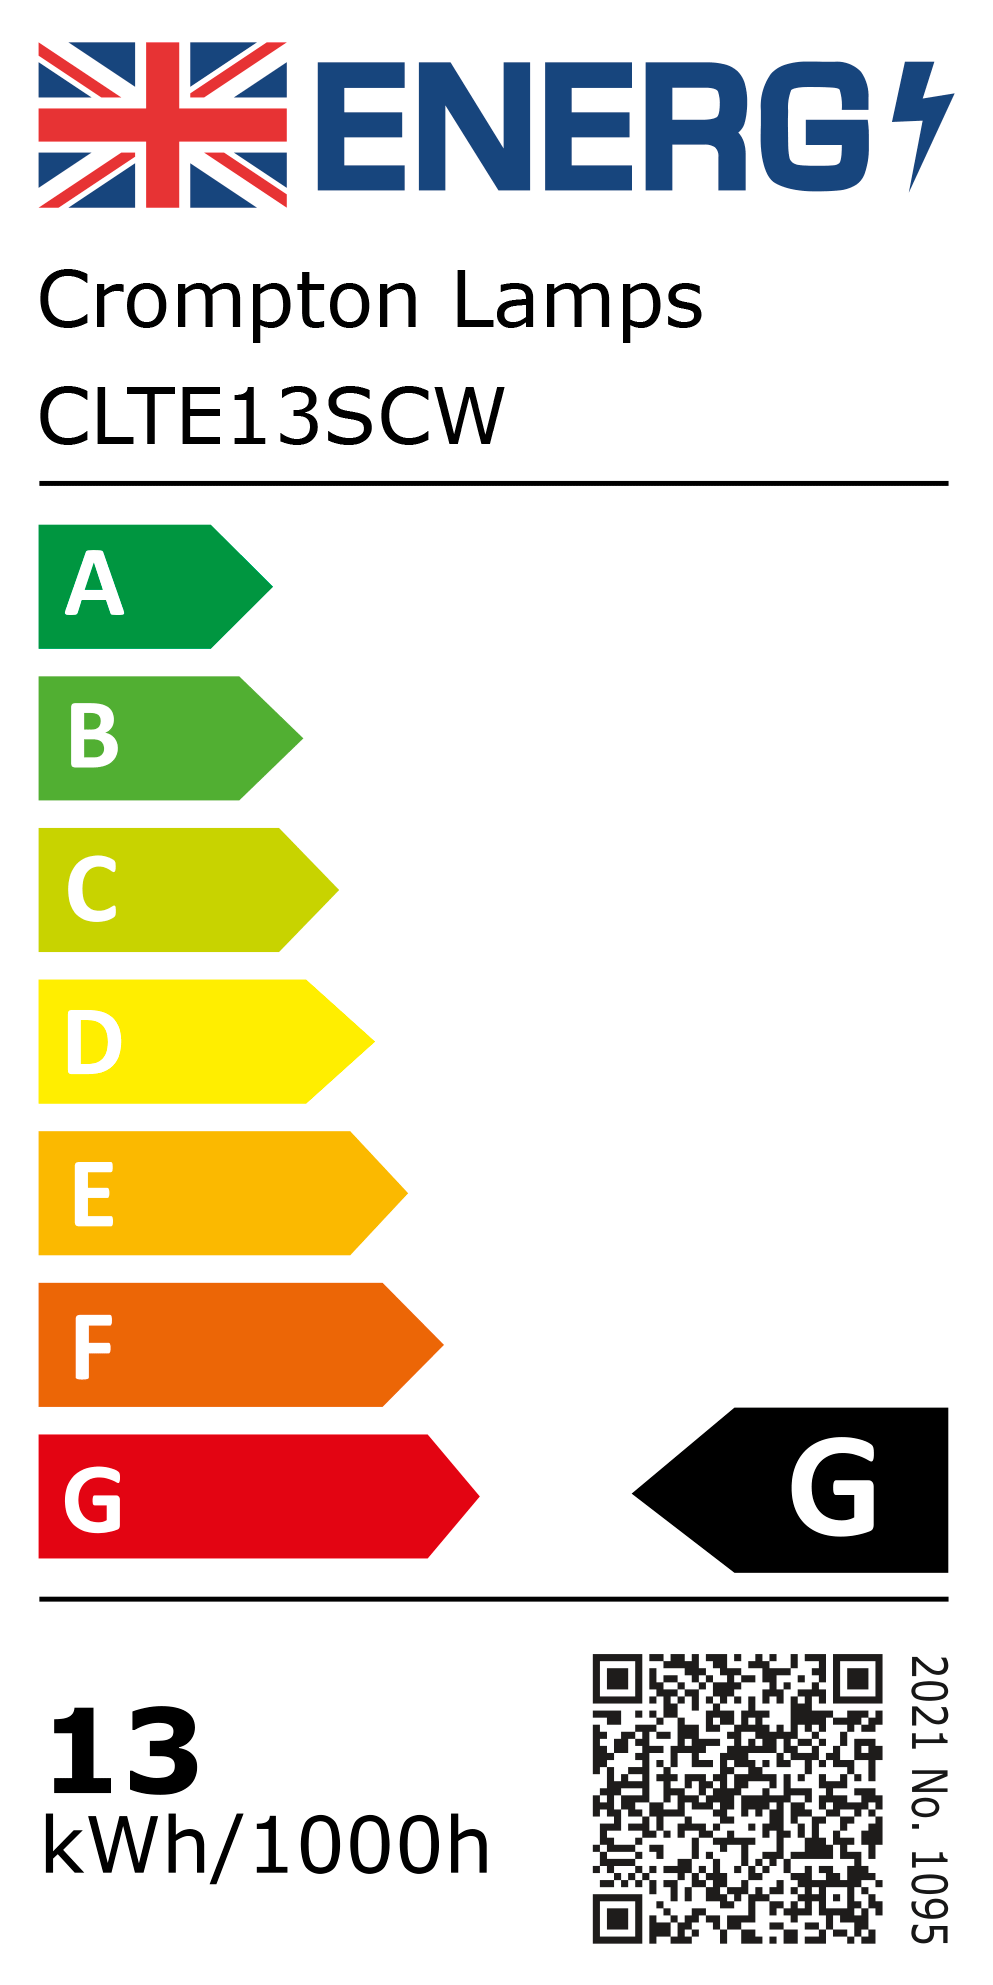 New 2021 Energy Rating Label: MPN CLTE13SCW